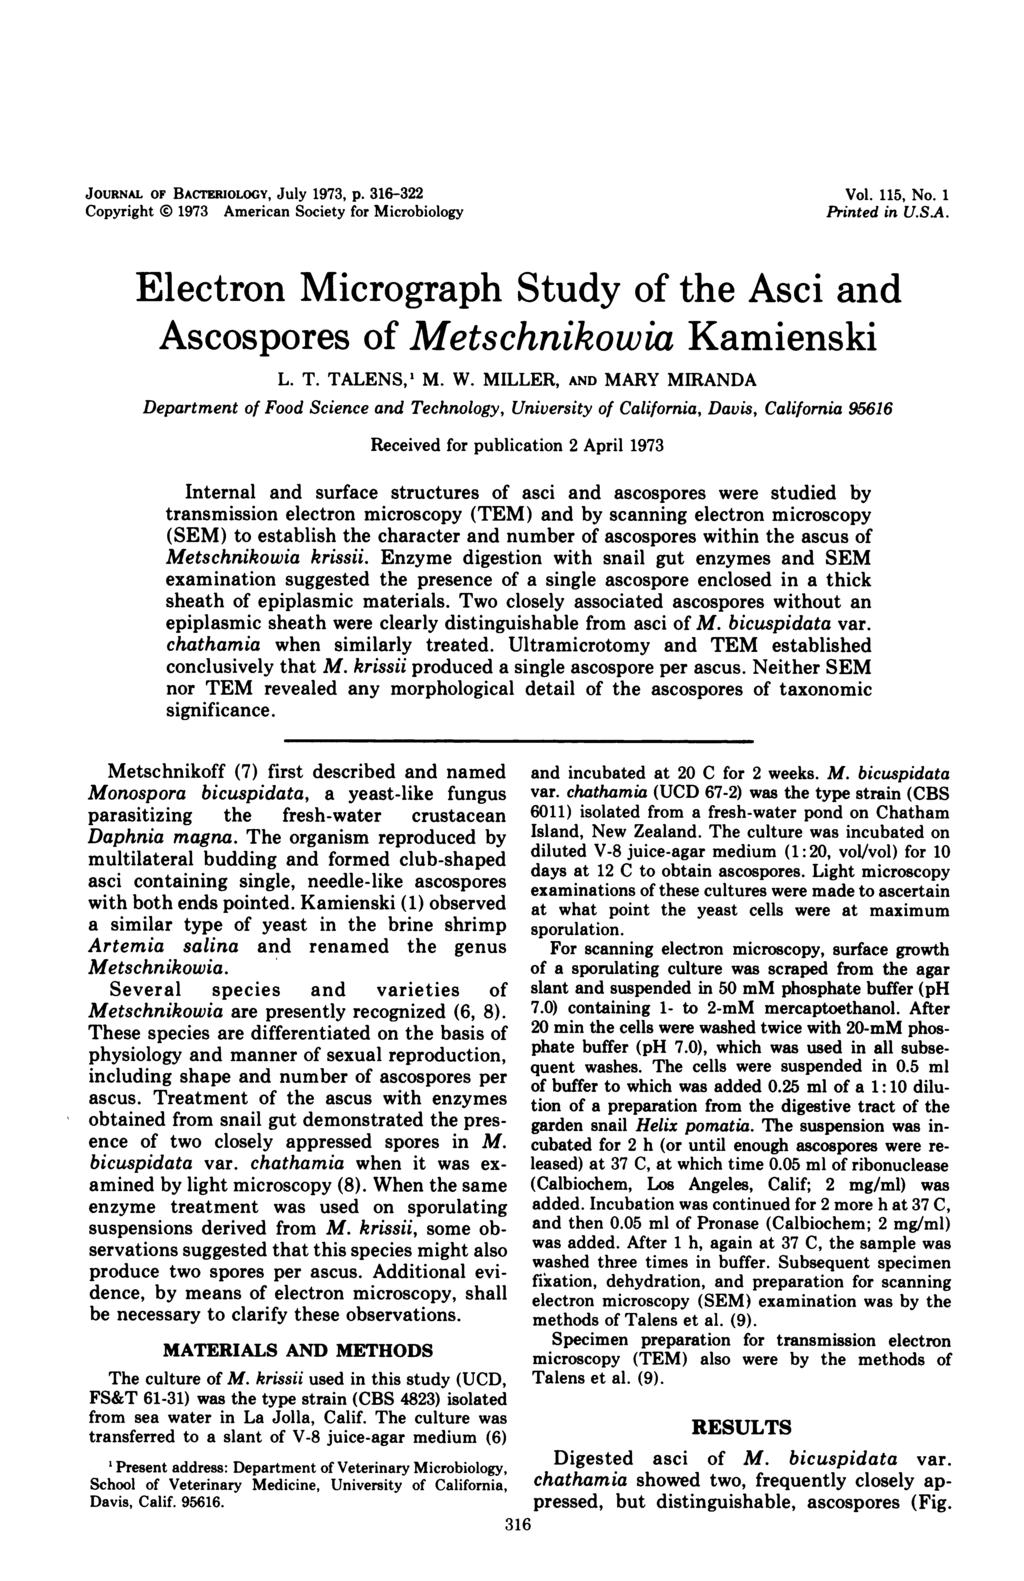 JOURNAL OF BACTERIOLOGY, July 1973, p. 316-322 Copyright 0 1973 American Society for Microbiology Vol. 115, No. 1 Printed in U.SA.